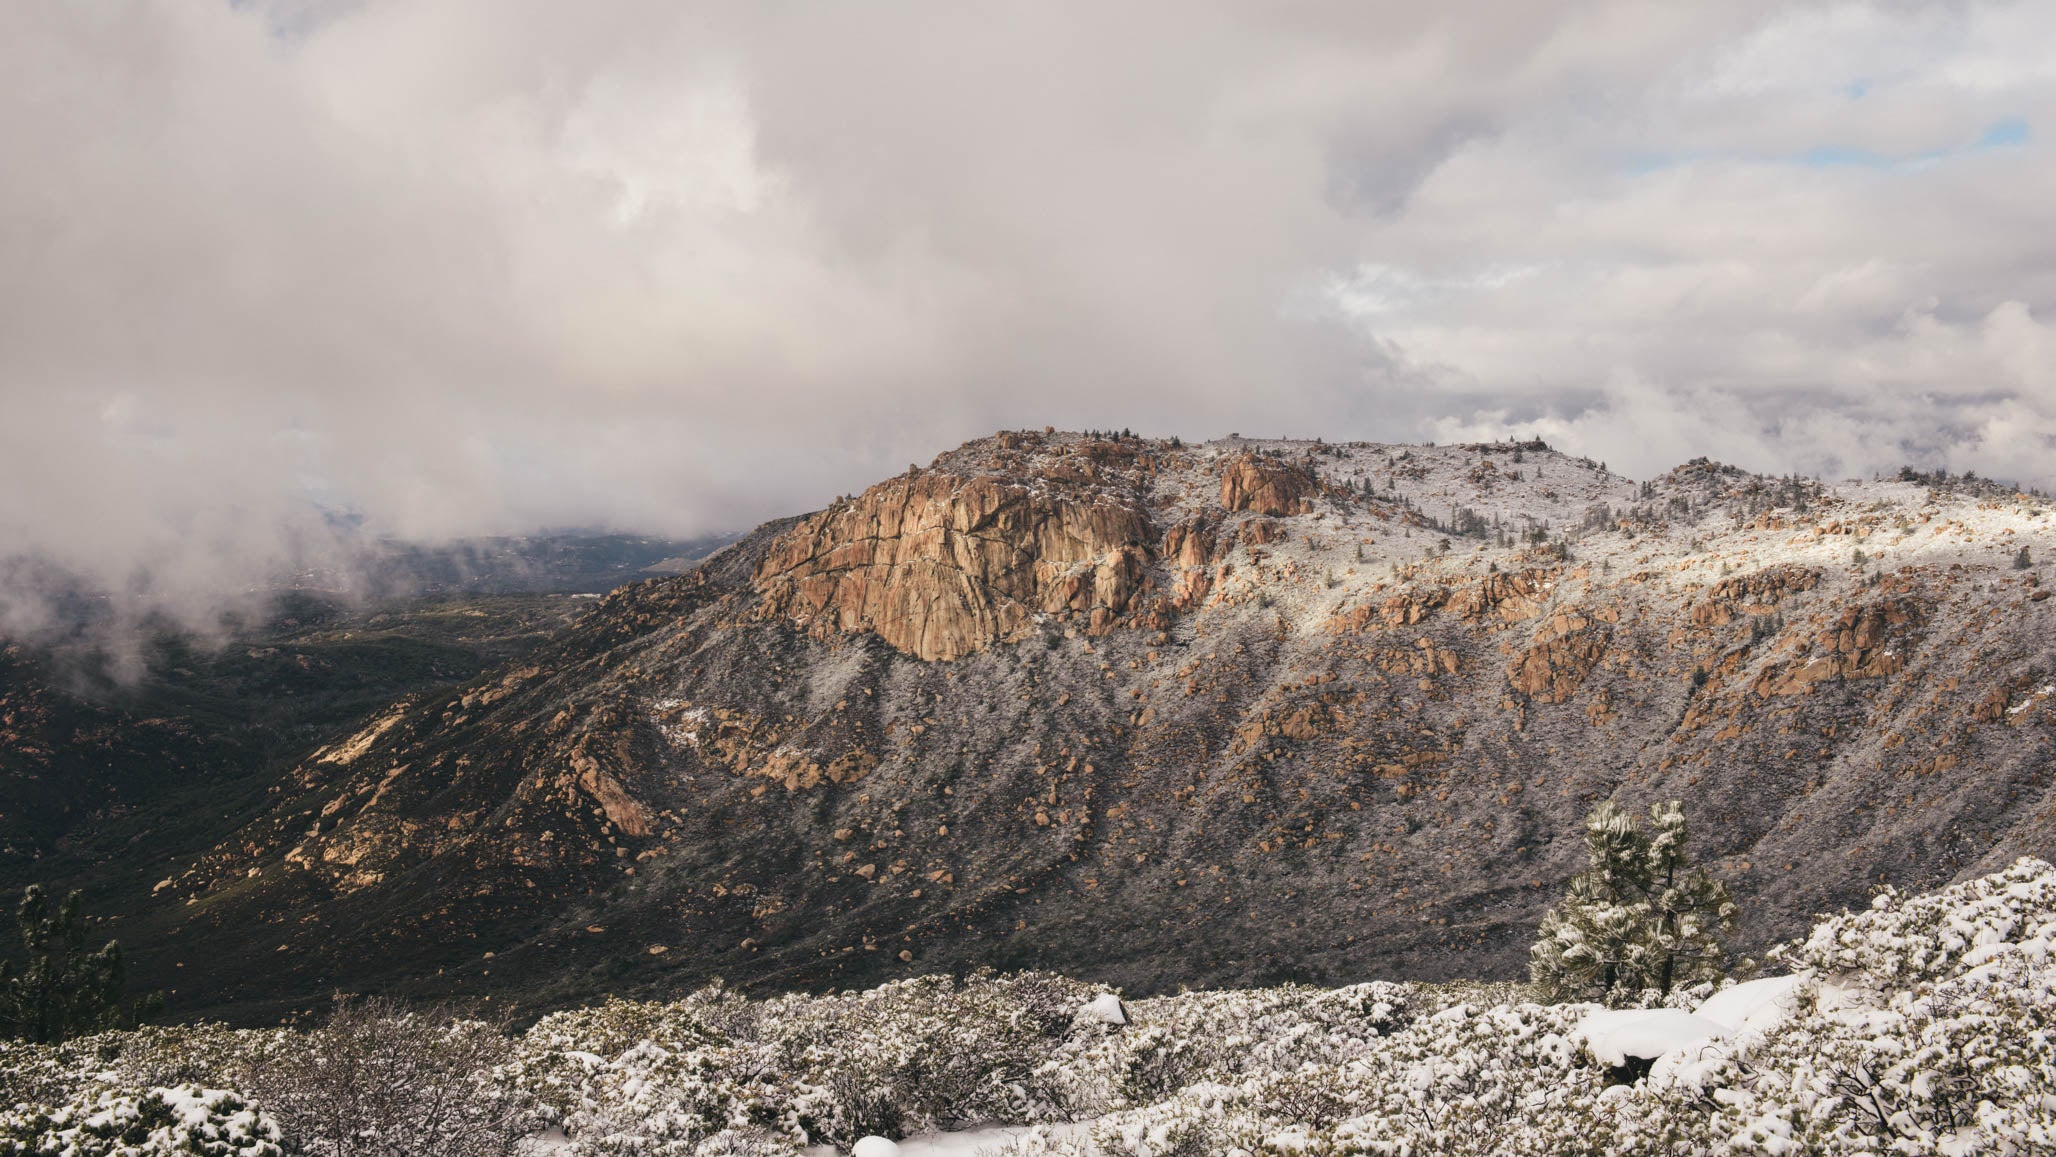 Snow on Corte Madera Mountain and Corral Canyon in the Cleveland National Forest in San Diego